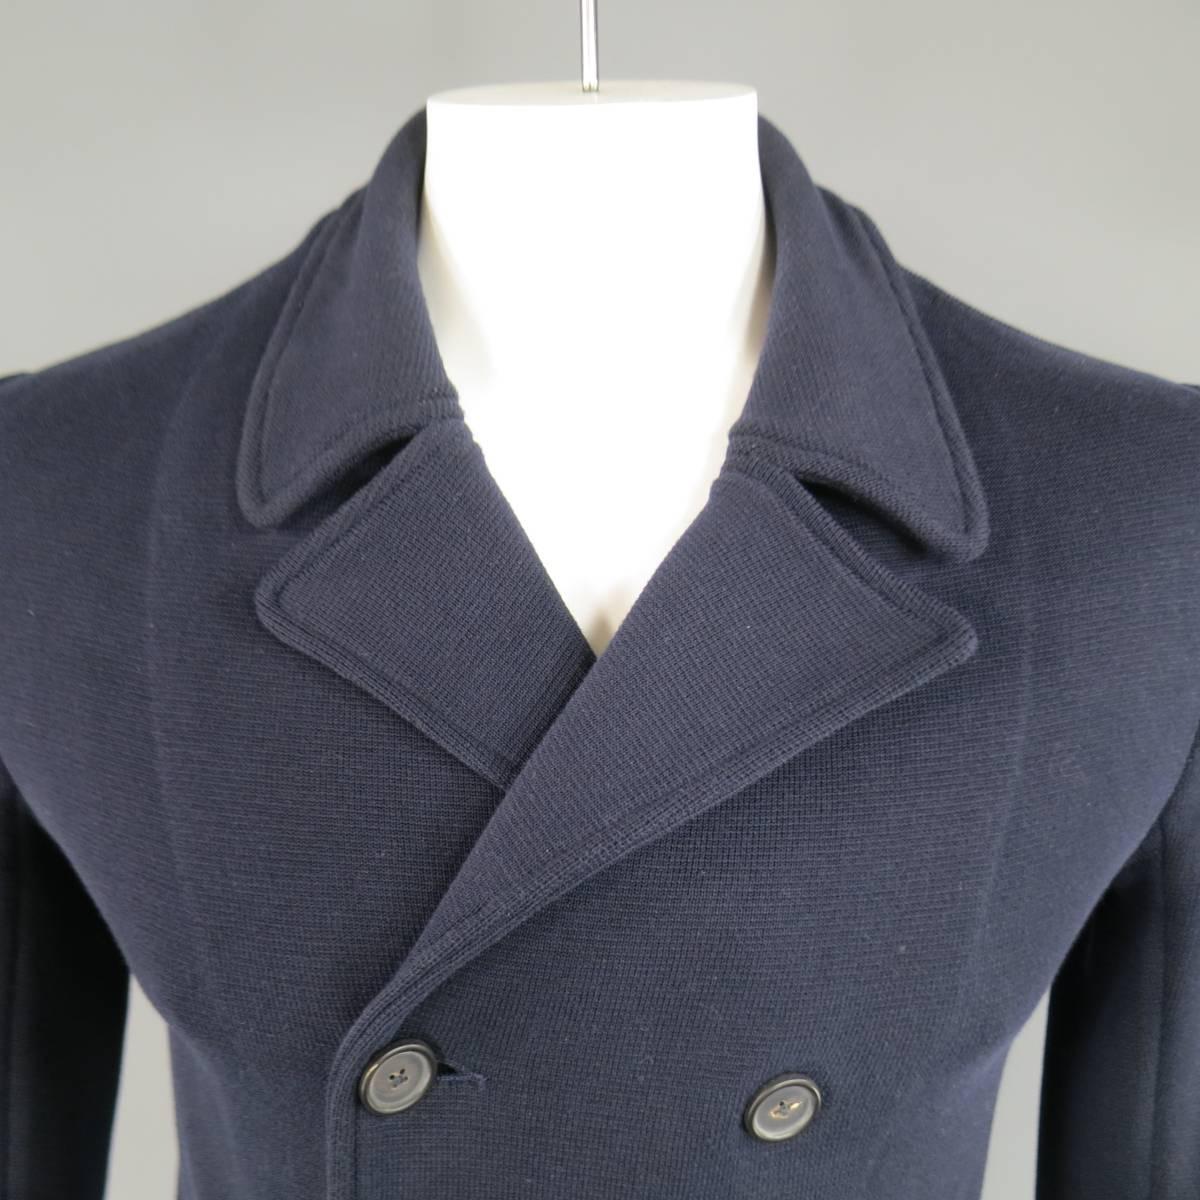 This classic men's JIL SANDER casual peacoat style jacket comes in a navy blue cotton knit, and features a double breasted button up closure, classic pointed collar lapel, and double slit pockets. Minor fading throughout knit. Made in Italy.
